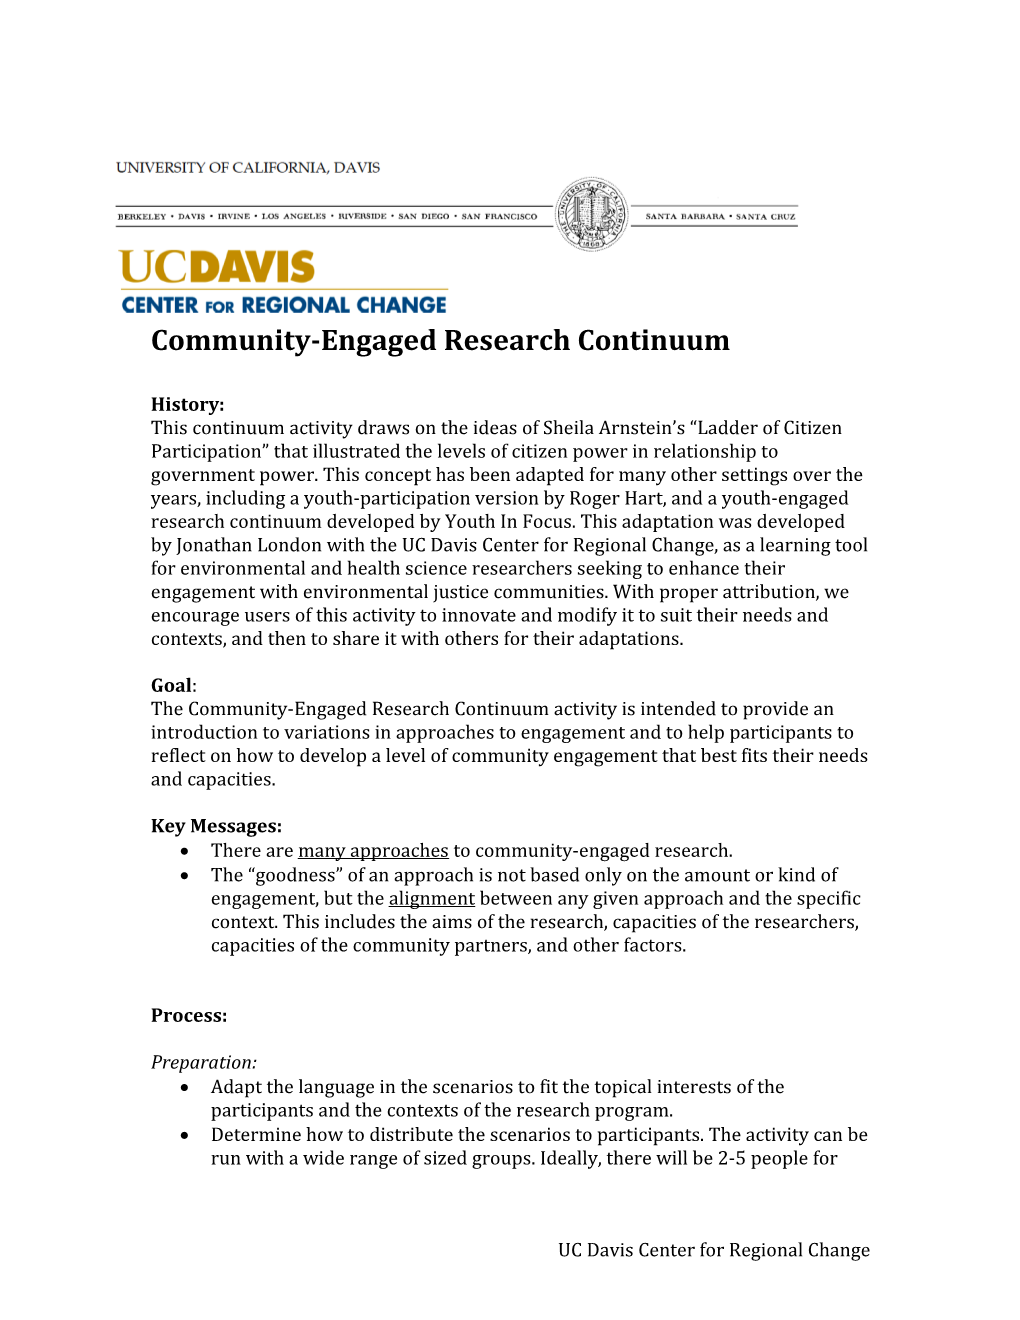 Community-Engaged Research Continuum